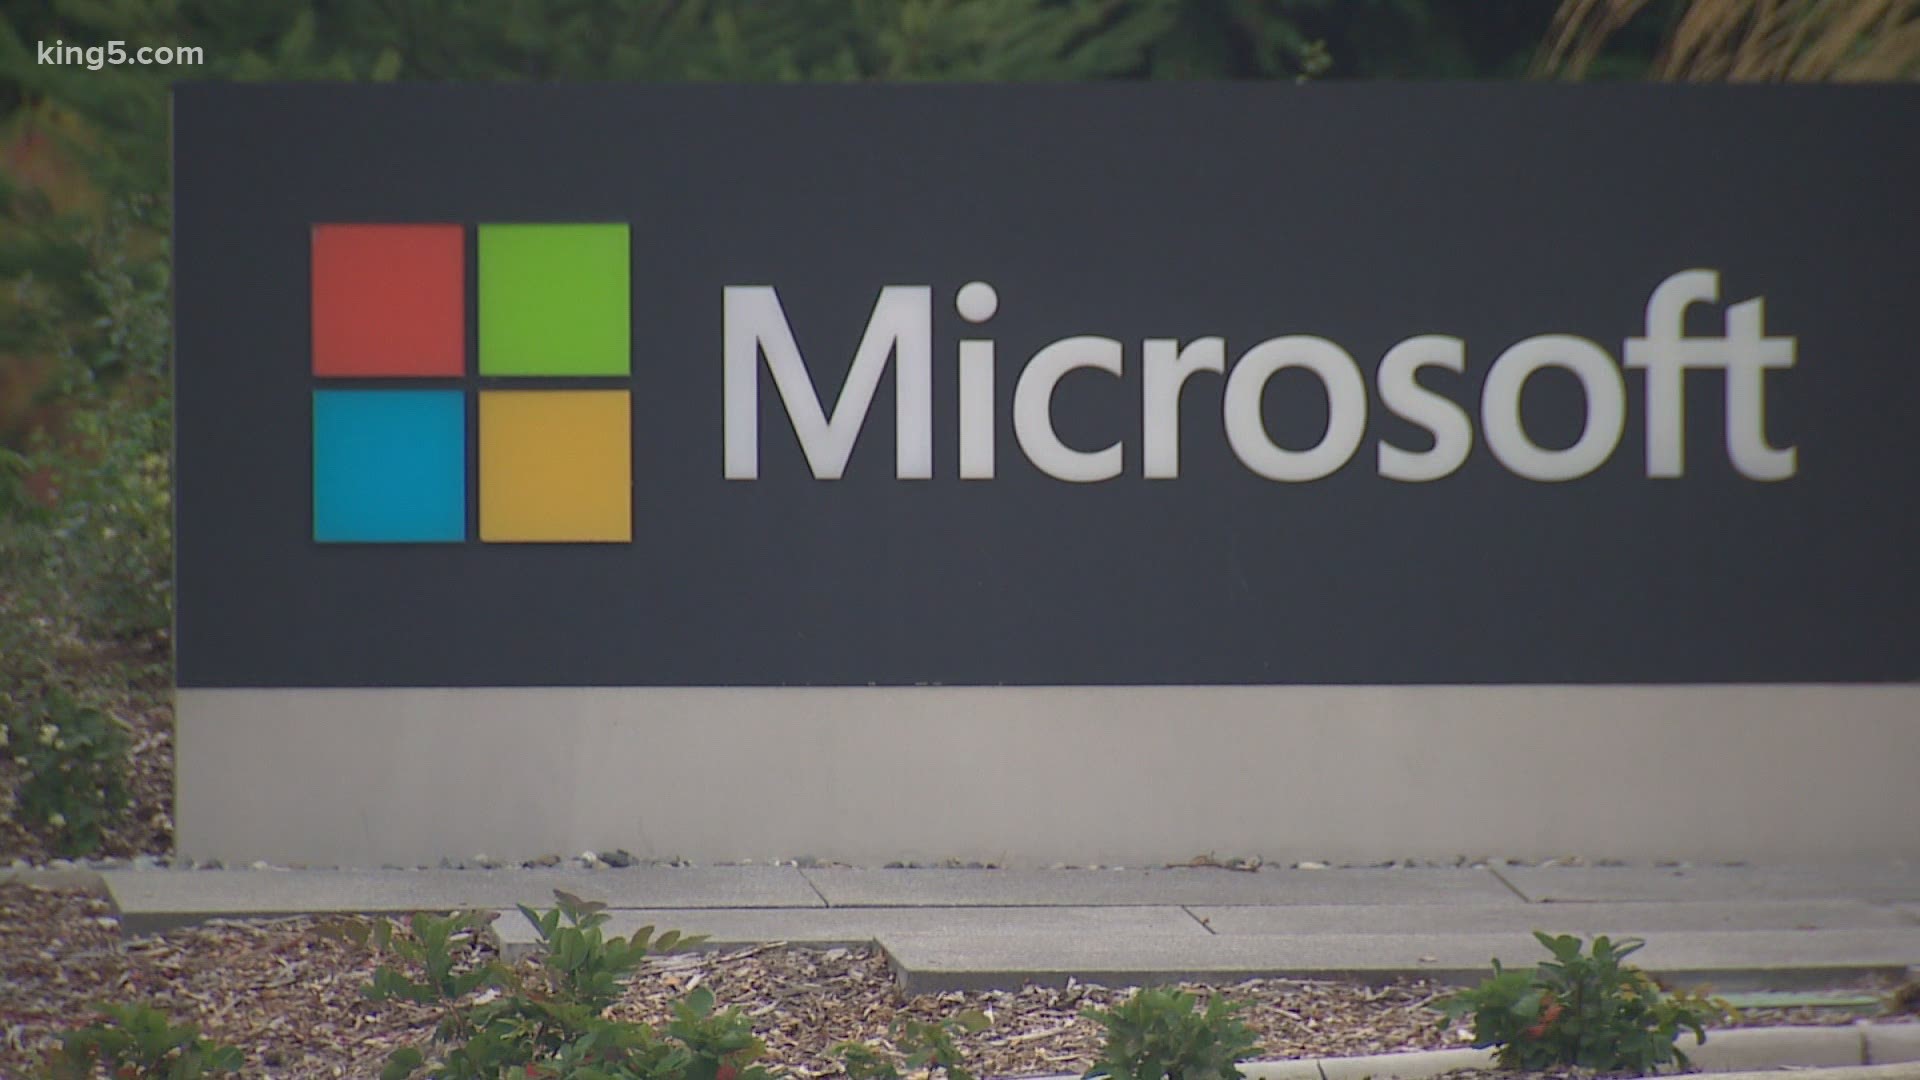 The $68.7 billion all cash deal is the largest acquisition in Microsoft's history